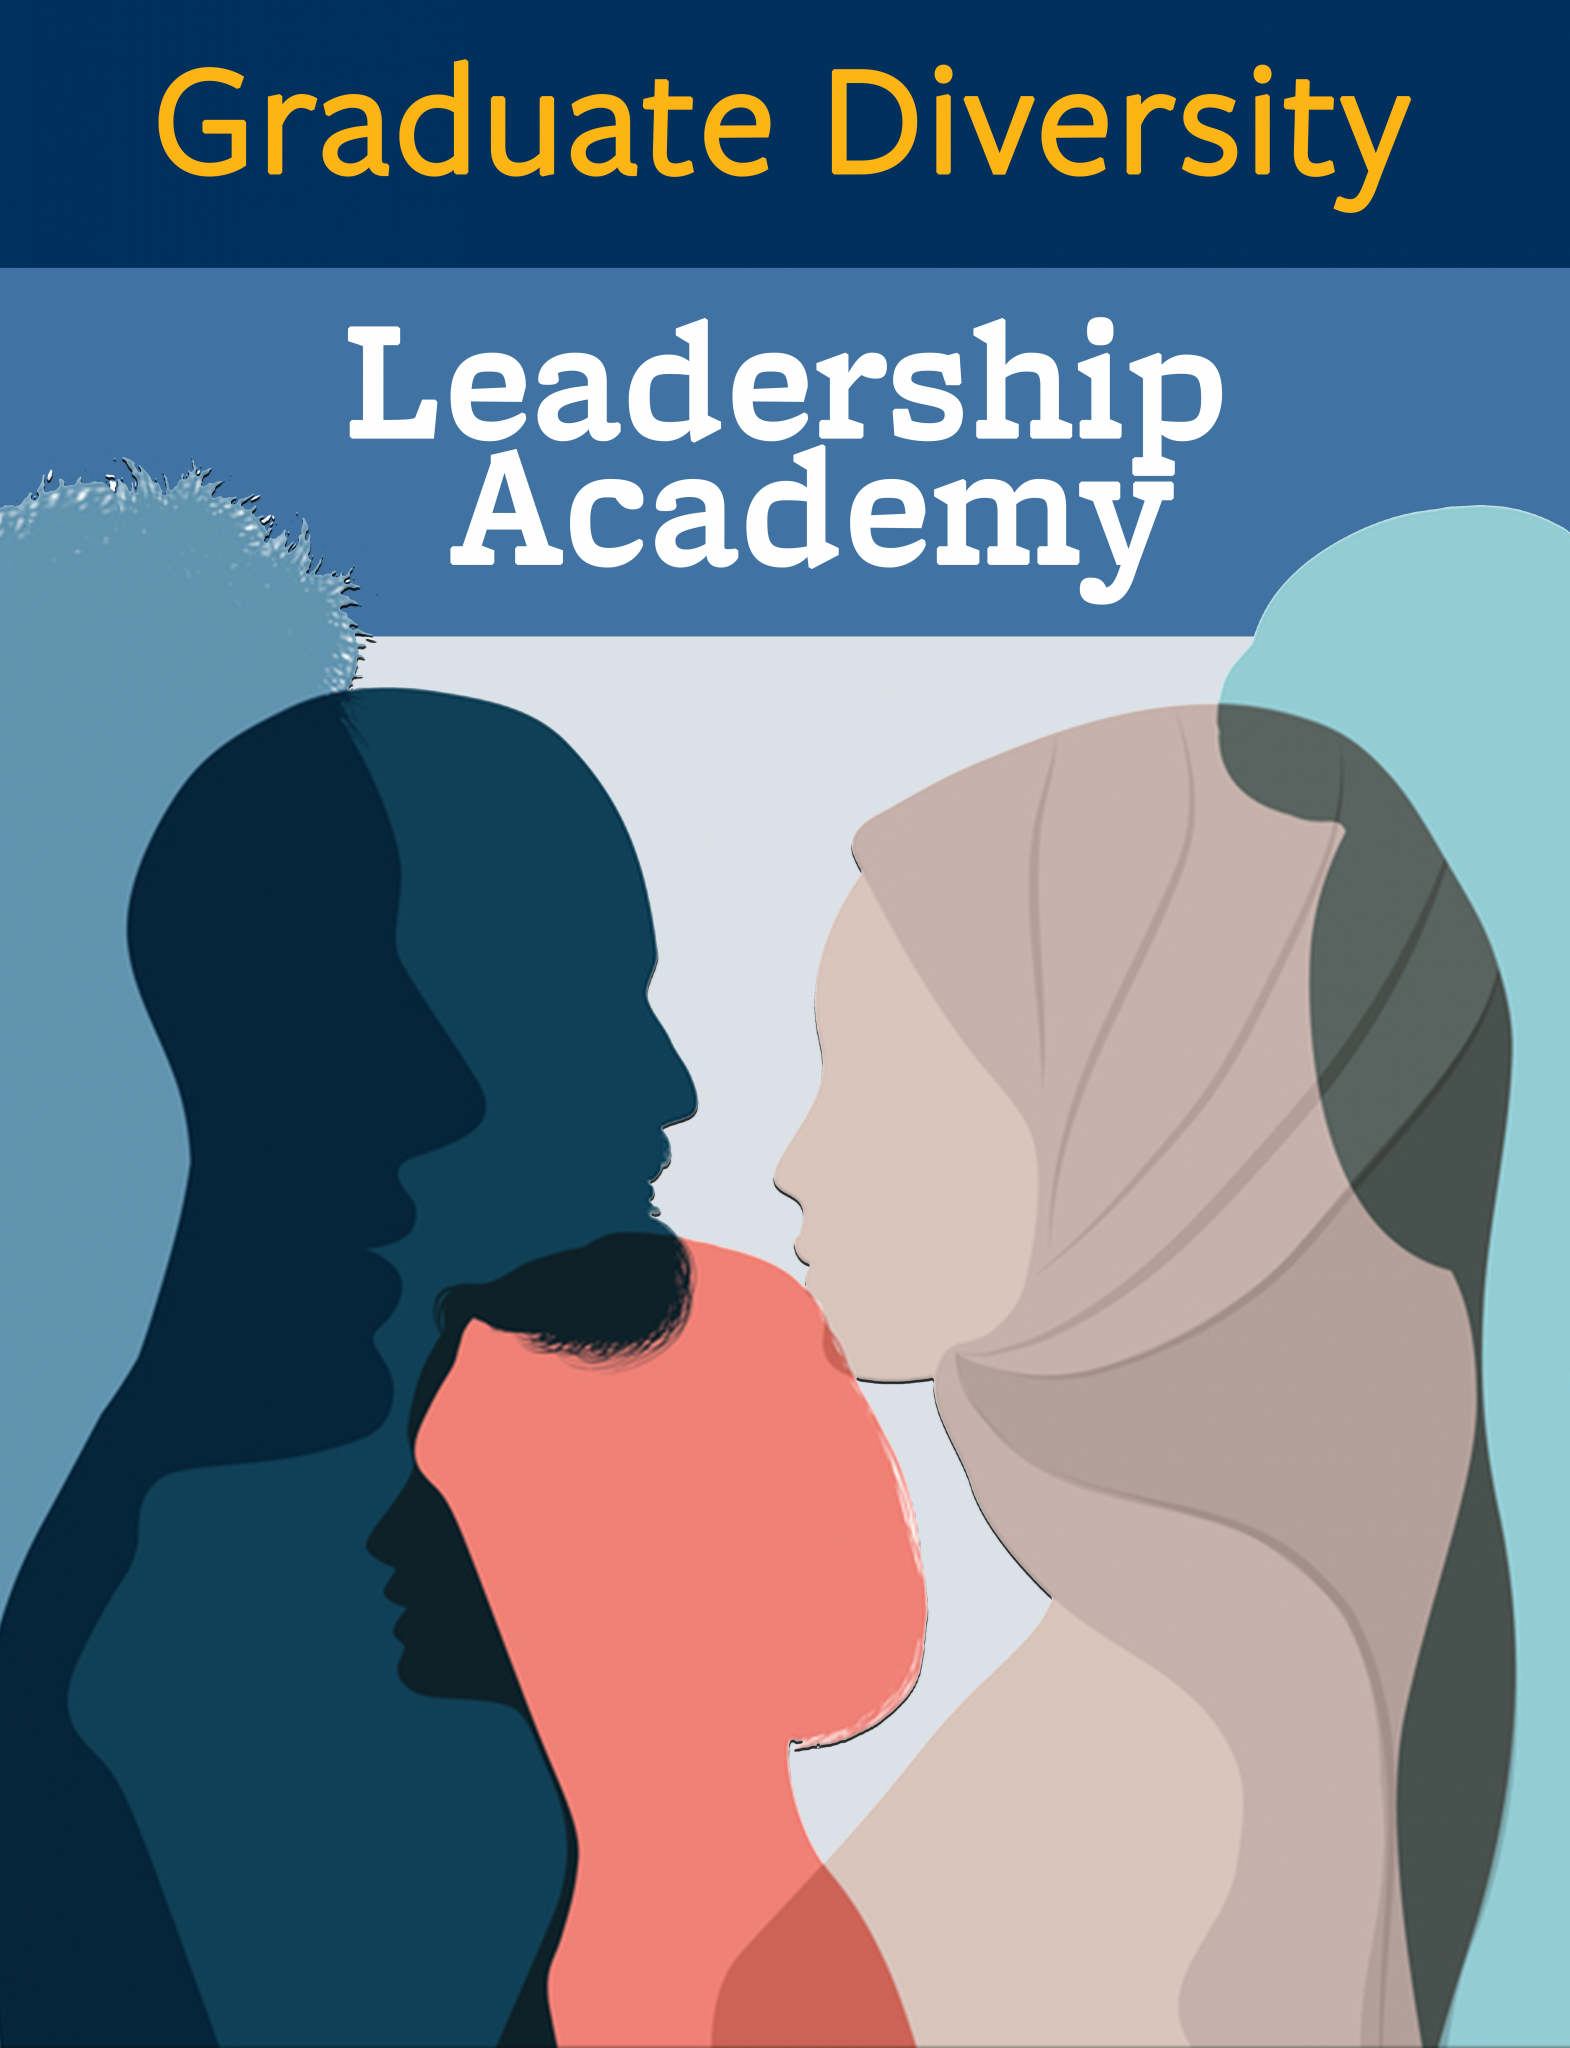 Graduate Diversity Leadership Academy text with image with silhouettes of different people in various shades